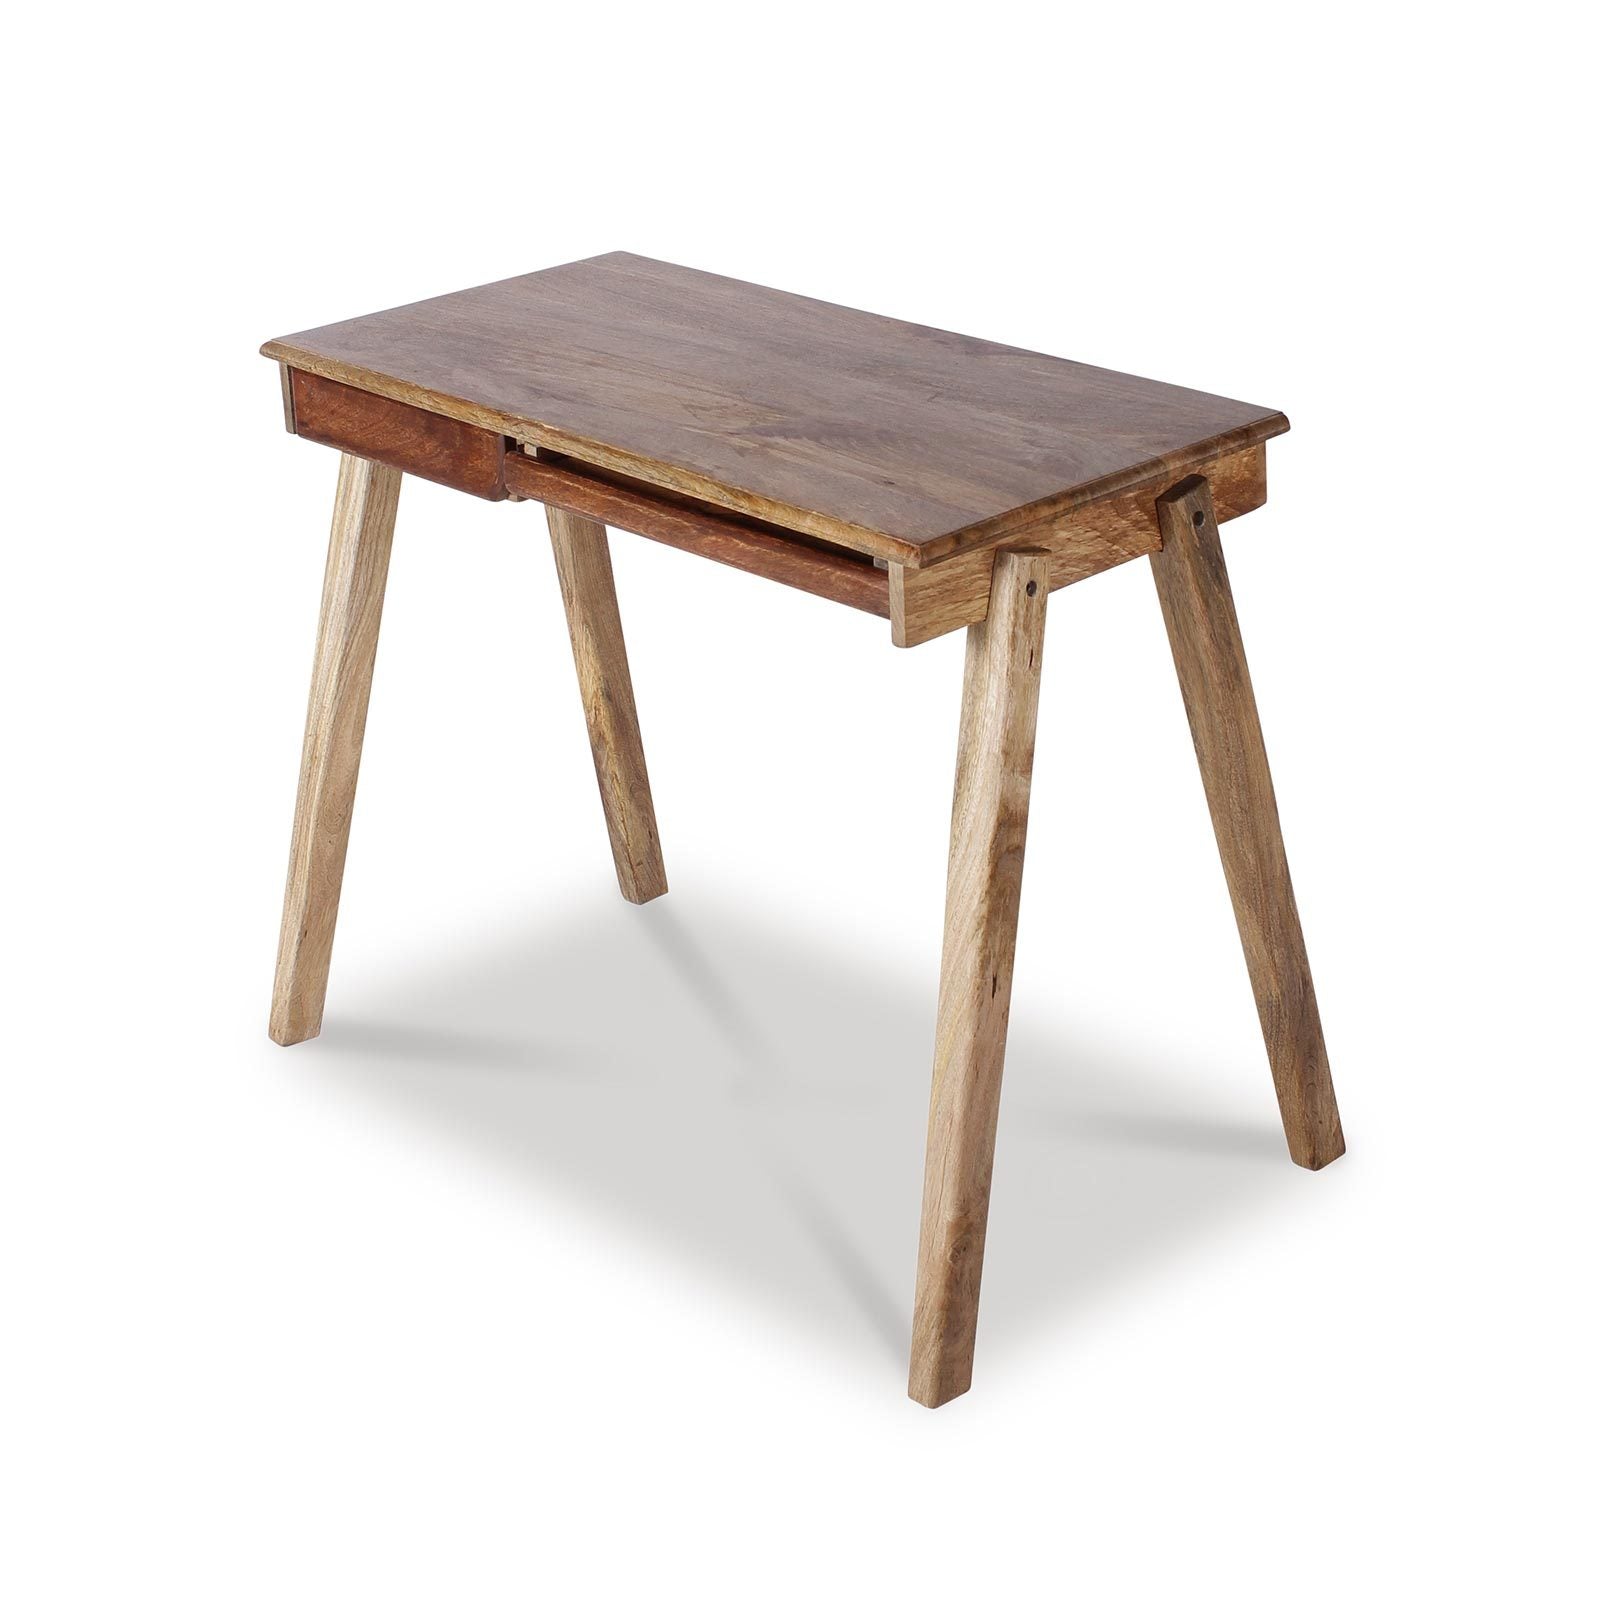 Wooden Study Table online